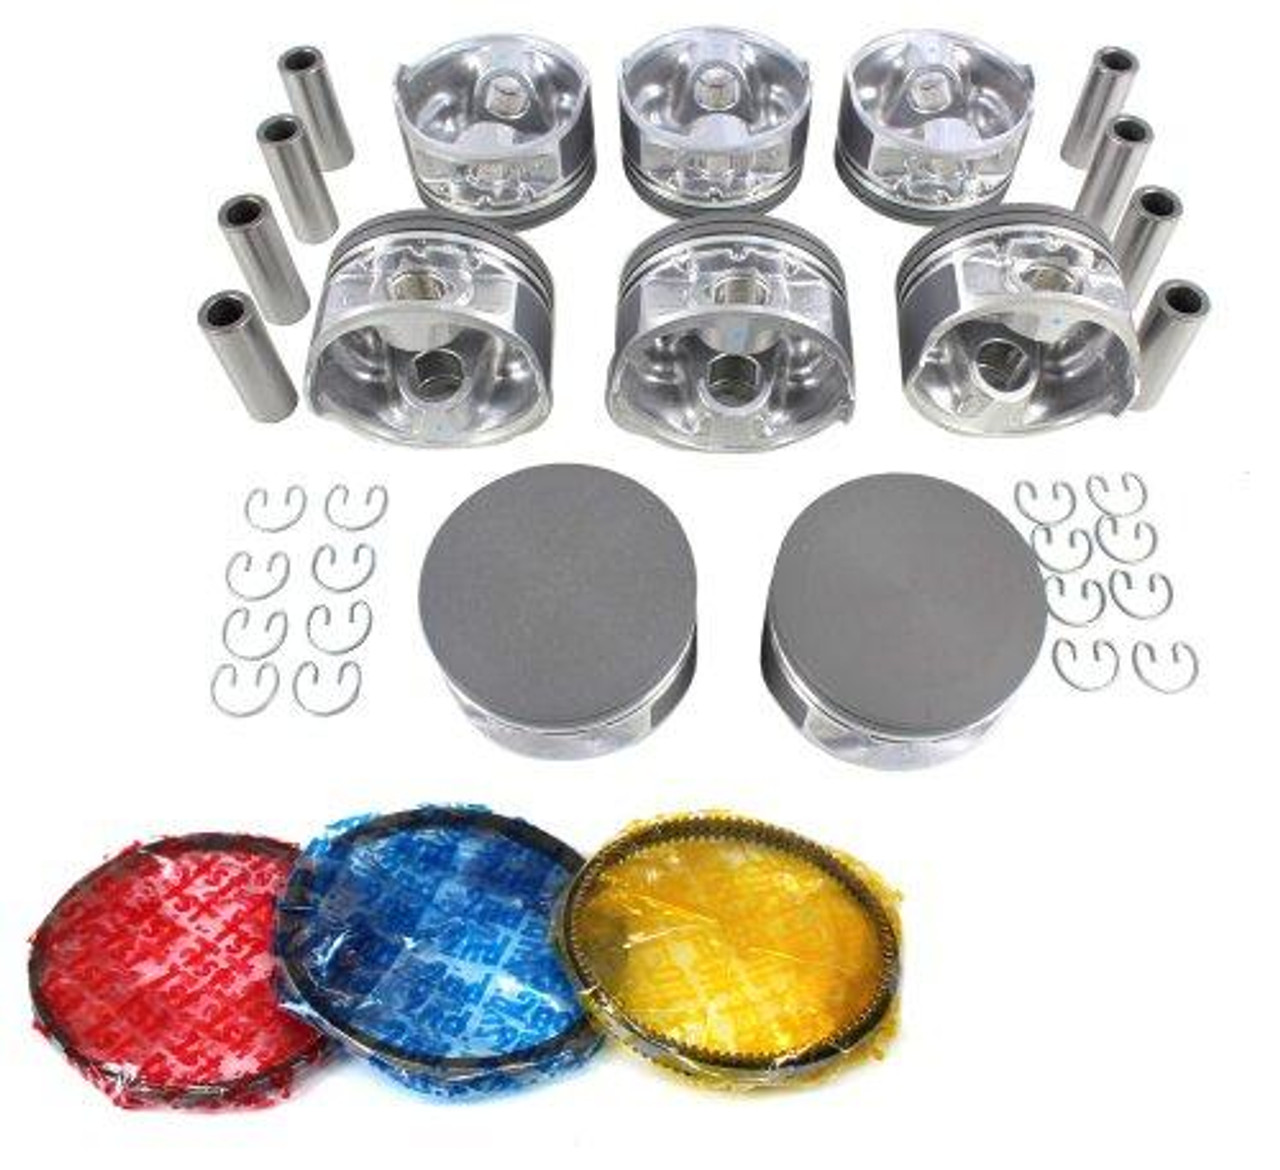 Piston Set with Rings - 2003 Ford Mustang 4.6L Engine Parts # PRK4171ZE7